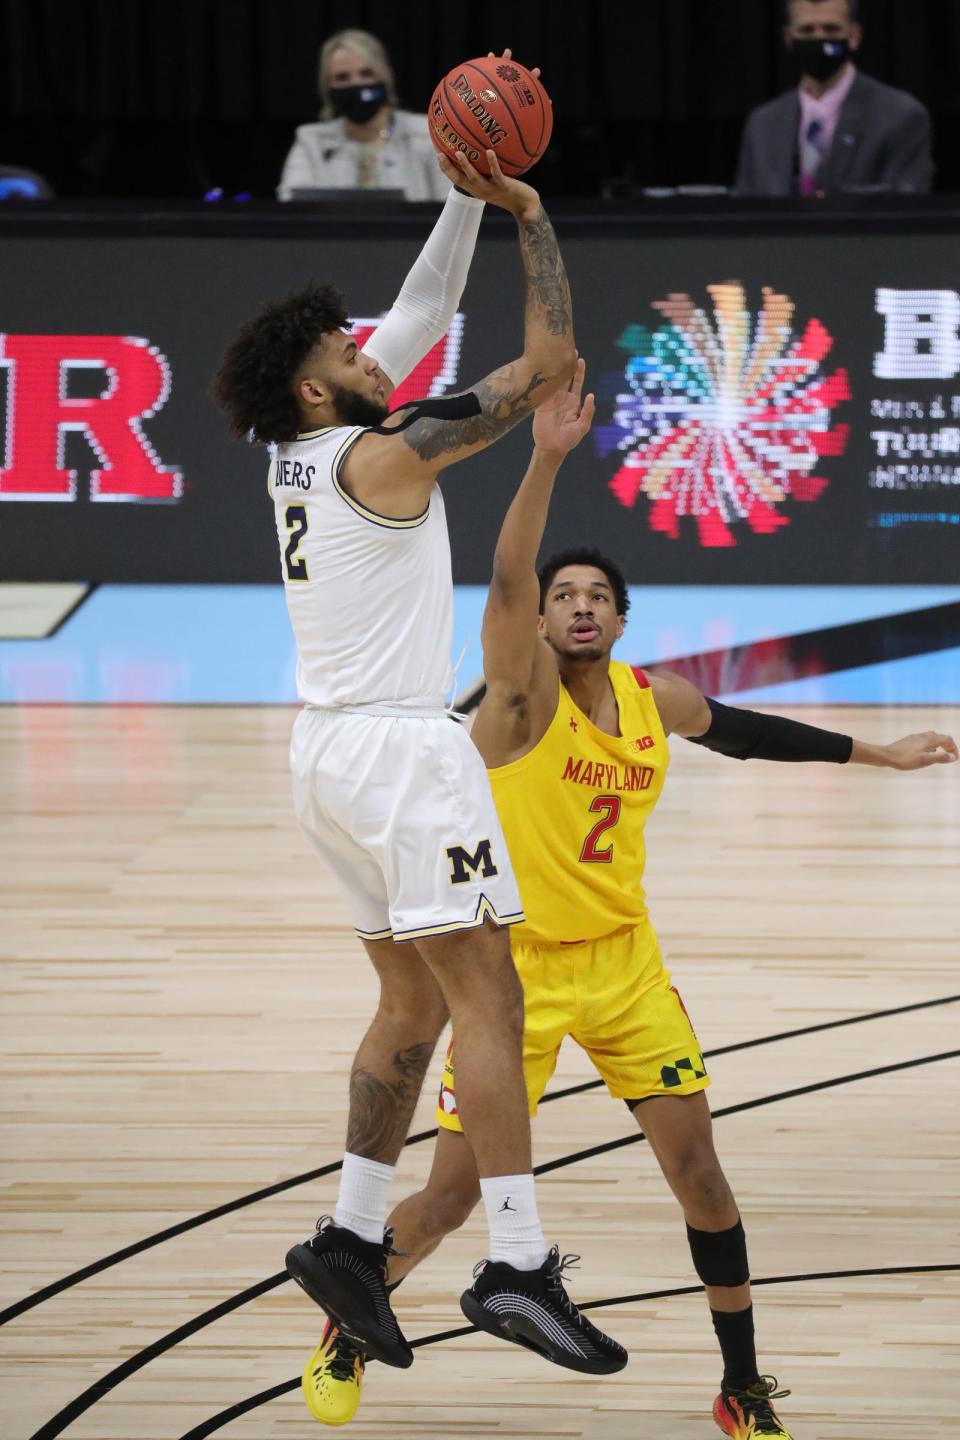 Michigan Wolverines forward Isaiah Livers shoots against Maryland Terrapins guard Aaron Wiggins during the Big Ten tournament quarterfinals Friday, March 12, 2021 at Lucas Oil Stadium in Indianapolis.